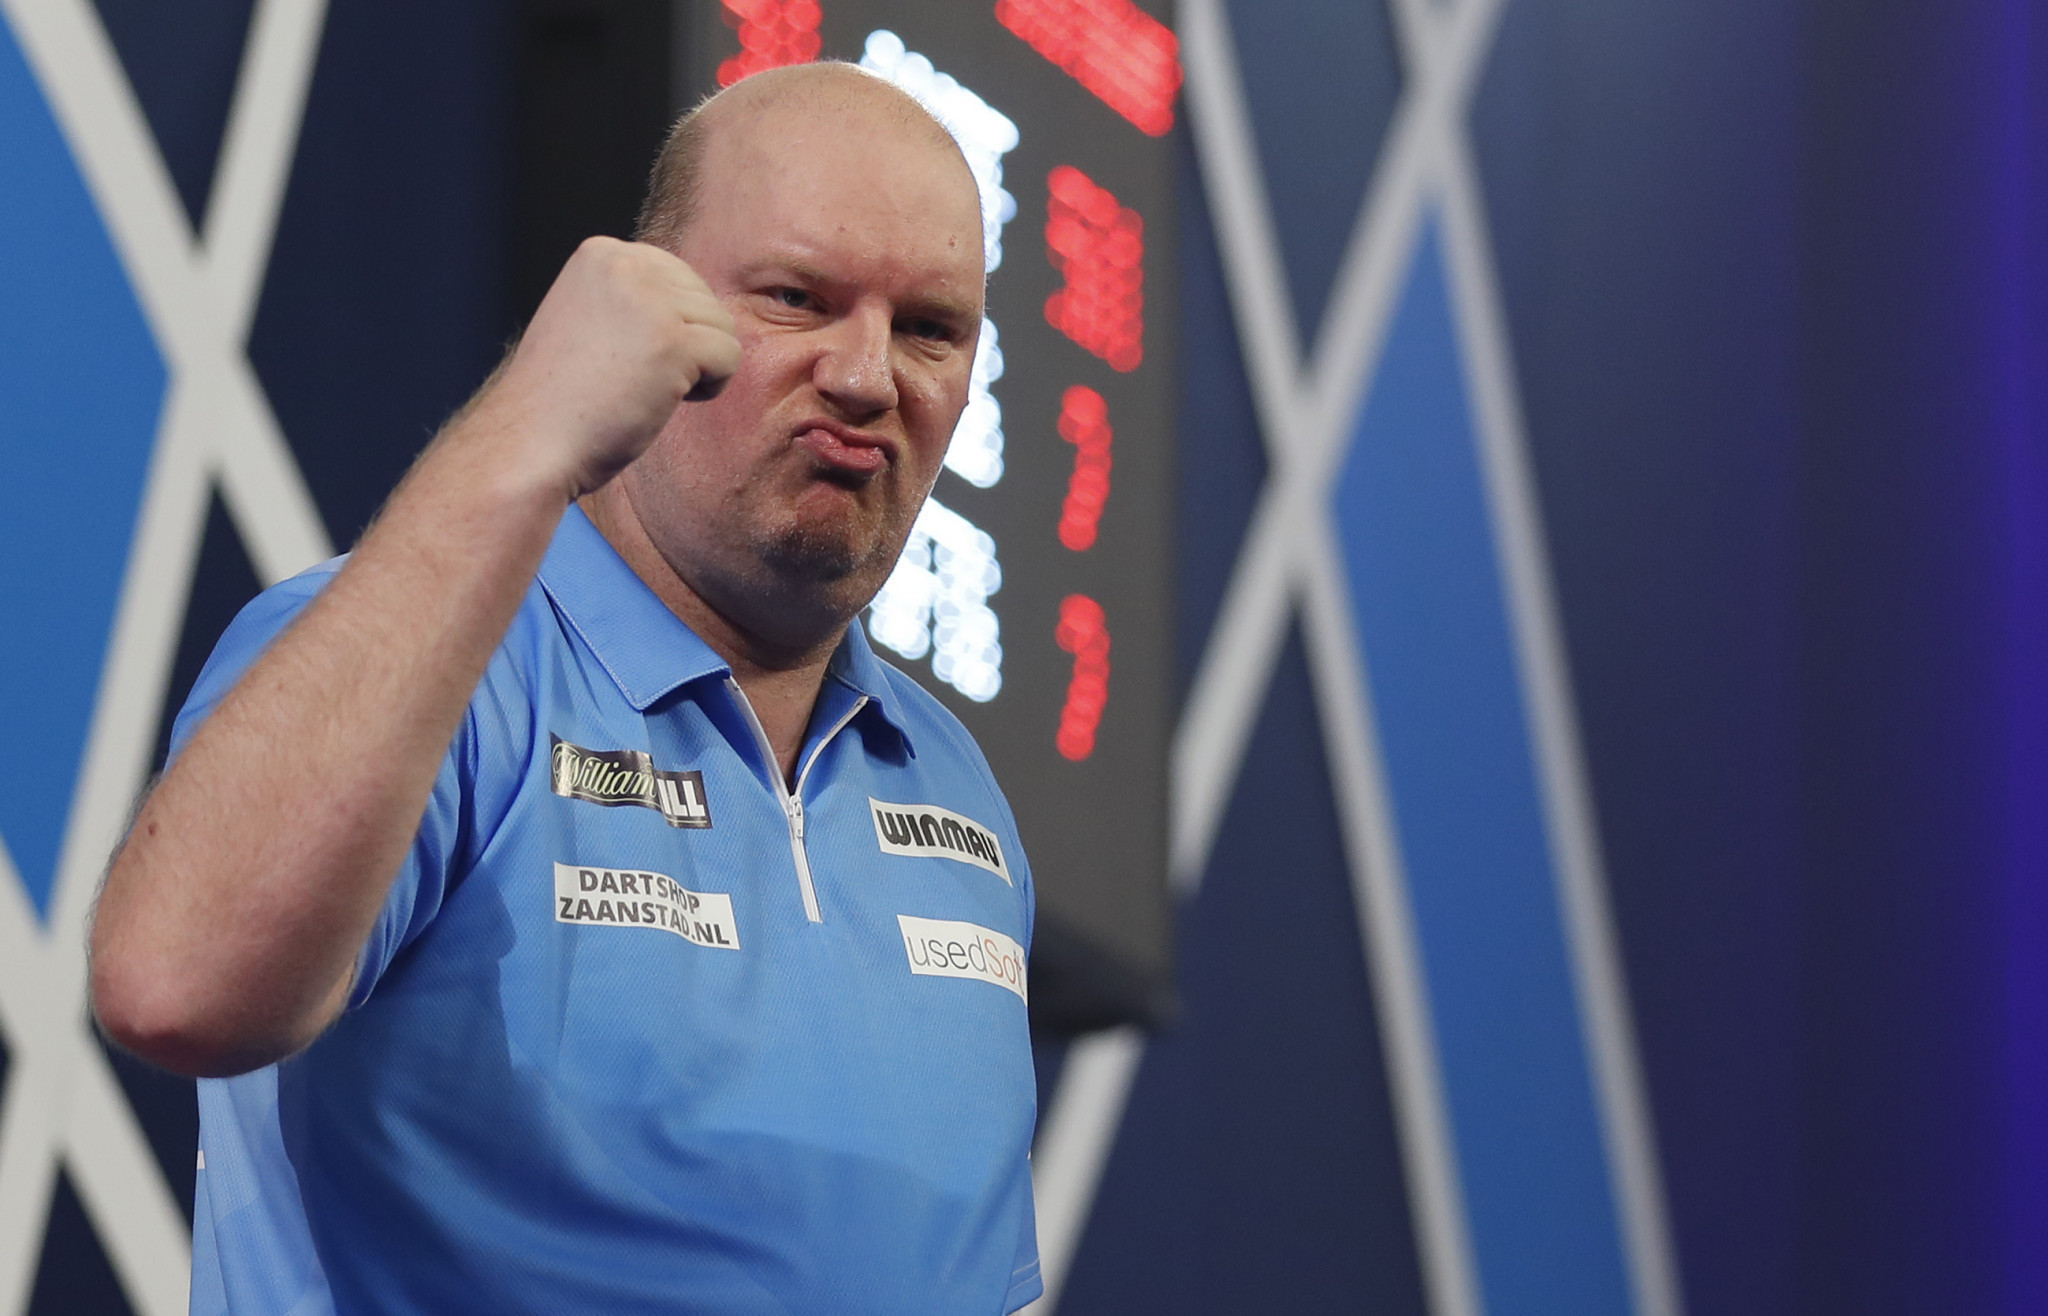 Van der Voort out of World Darts Championship following COVID-19 positive